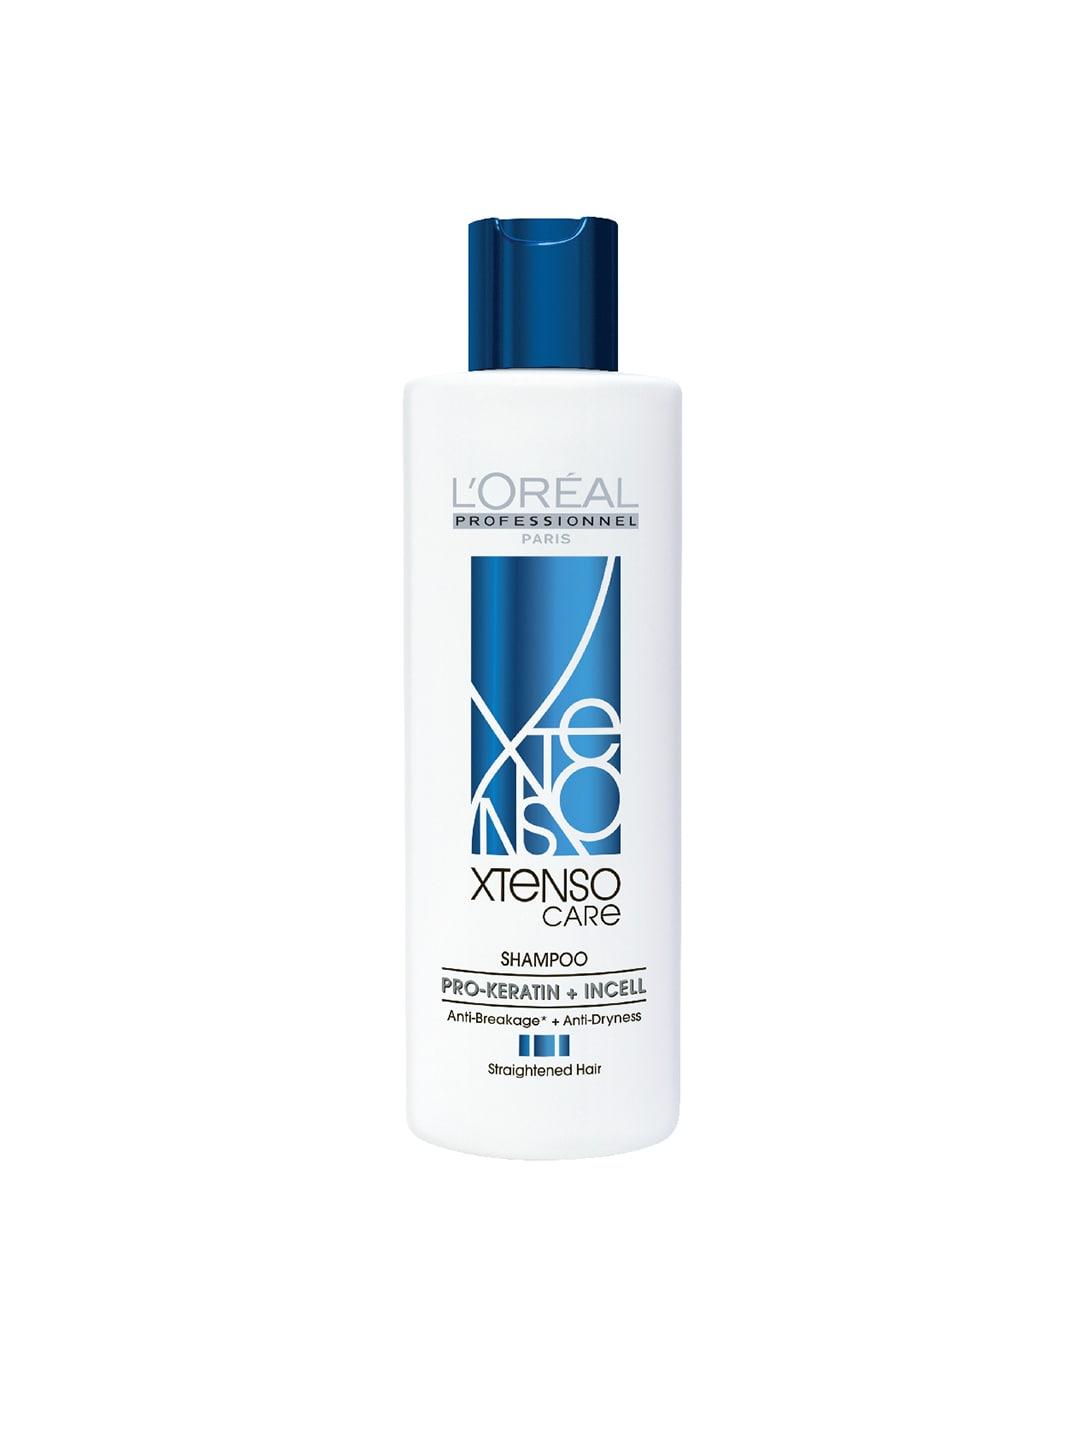 LOreal Professionnel Xtenso Care Shampoo with Pro-Keratine for Straightened Hair-250ml